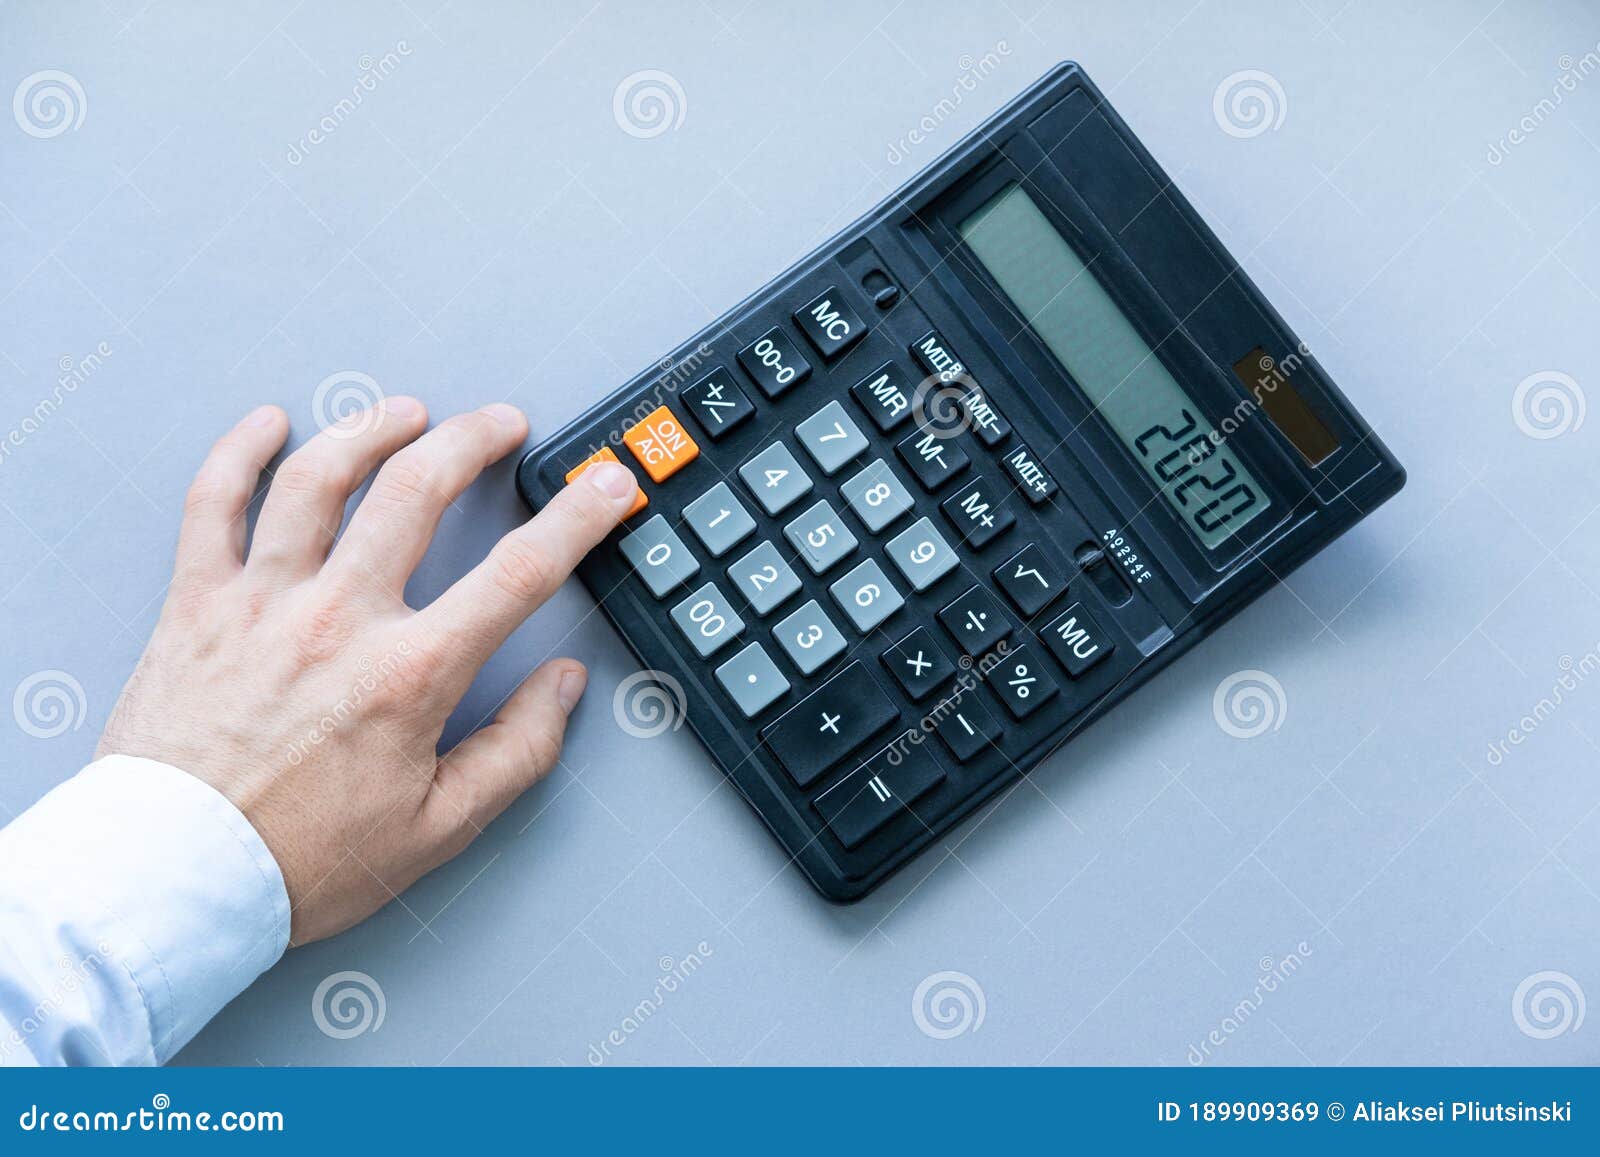 Inclined nitrogen sew Reset the Calculator by Pressing the Button with Your Index Finger.  Business Concept Planning 2021 Stock Image - Image of budget, 2021:  189909369